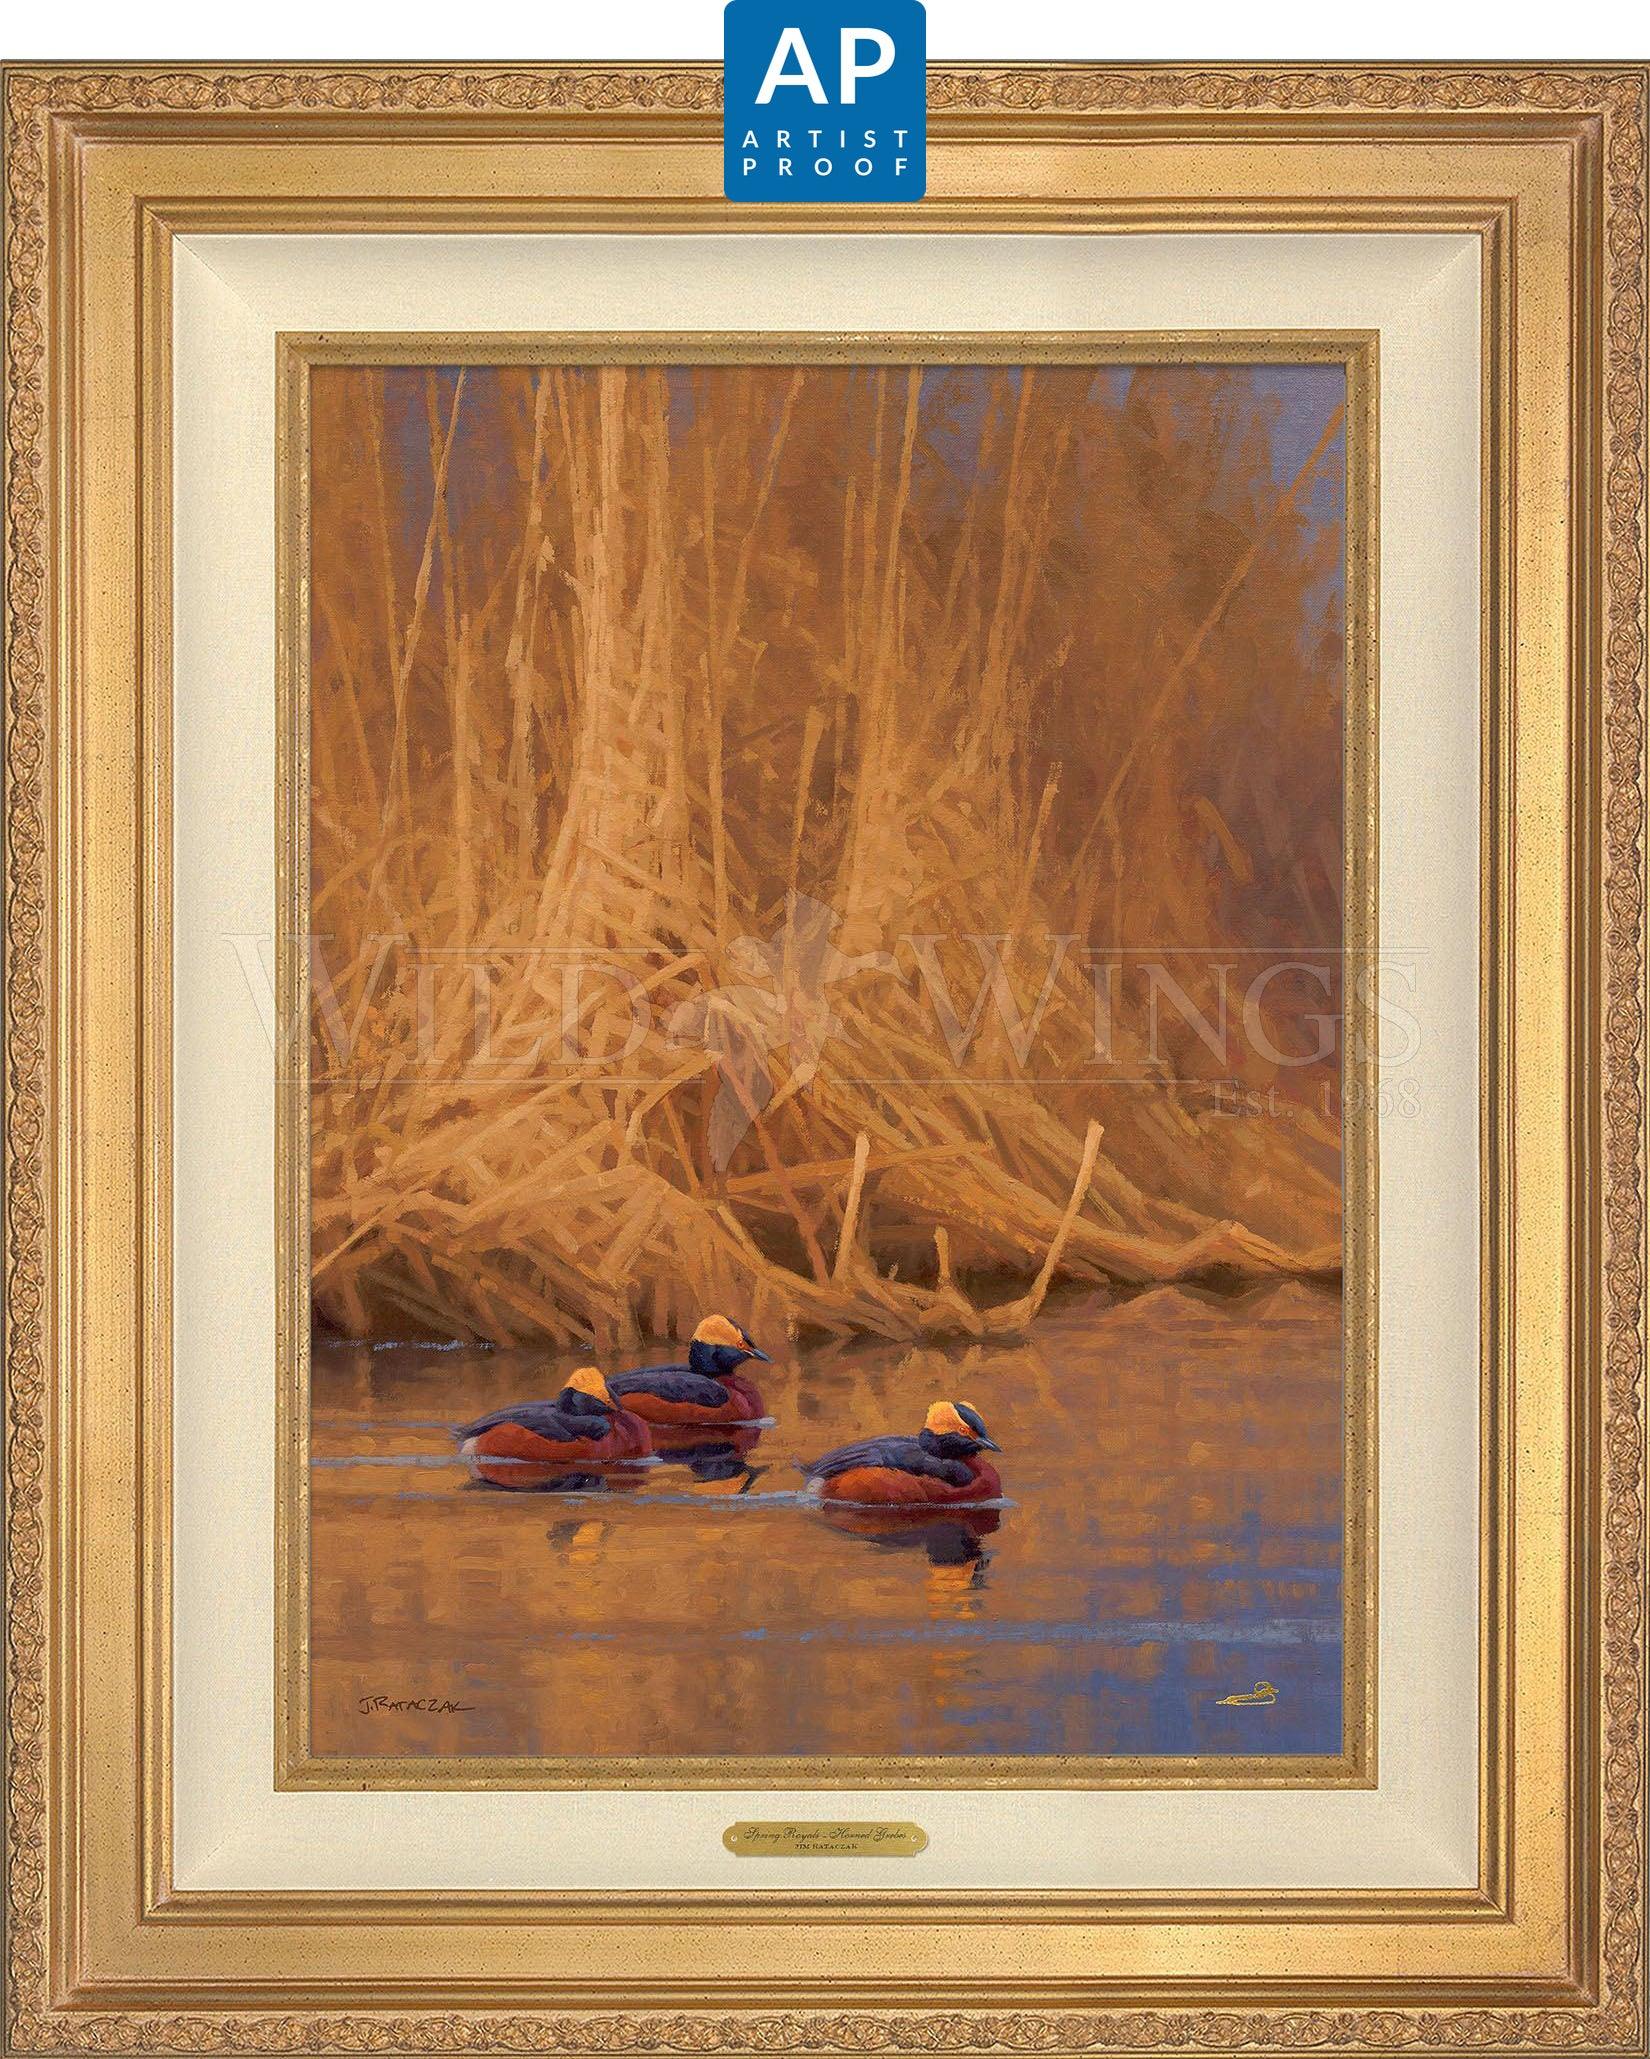 Spring Royals—Horned Grebes; Artist Proof Edition (AP) Master Artisan Canvas - Wild Wings